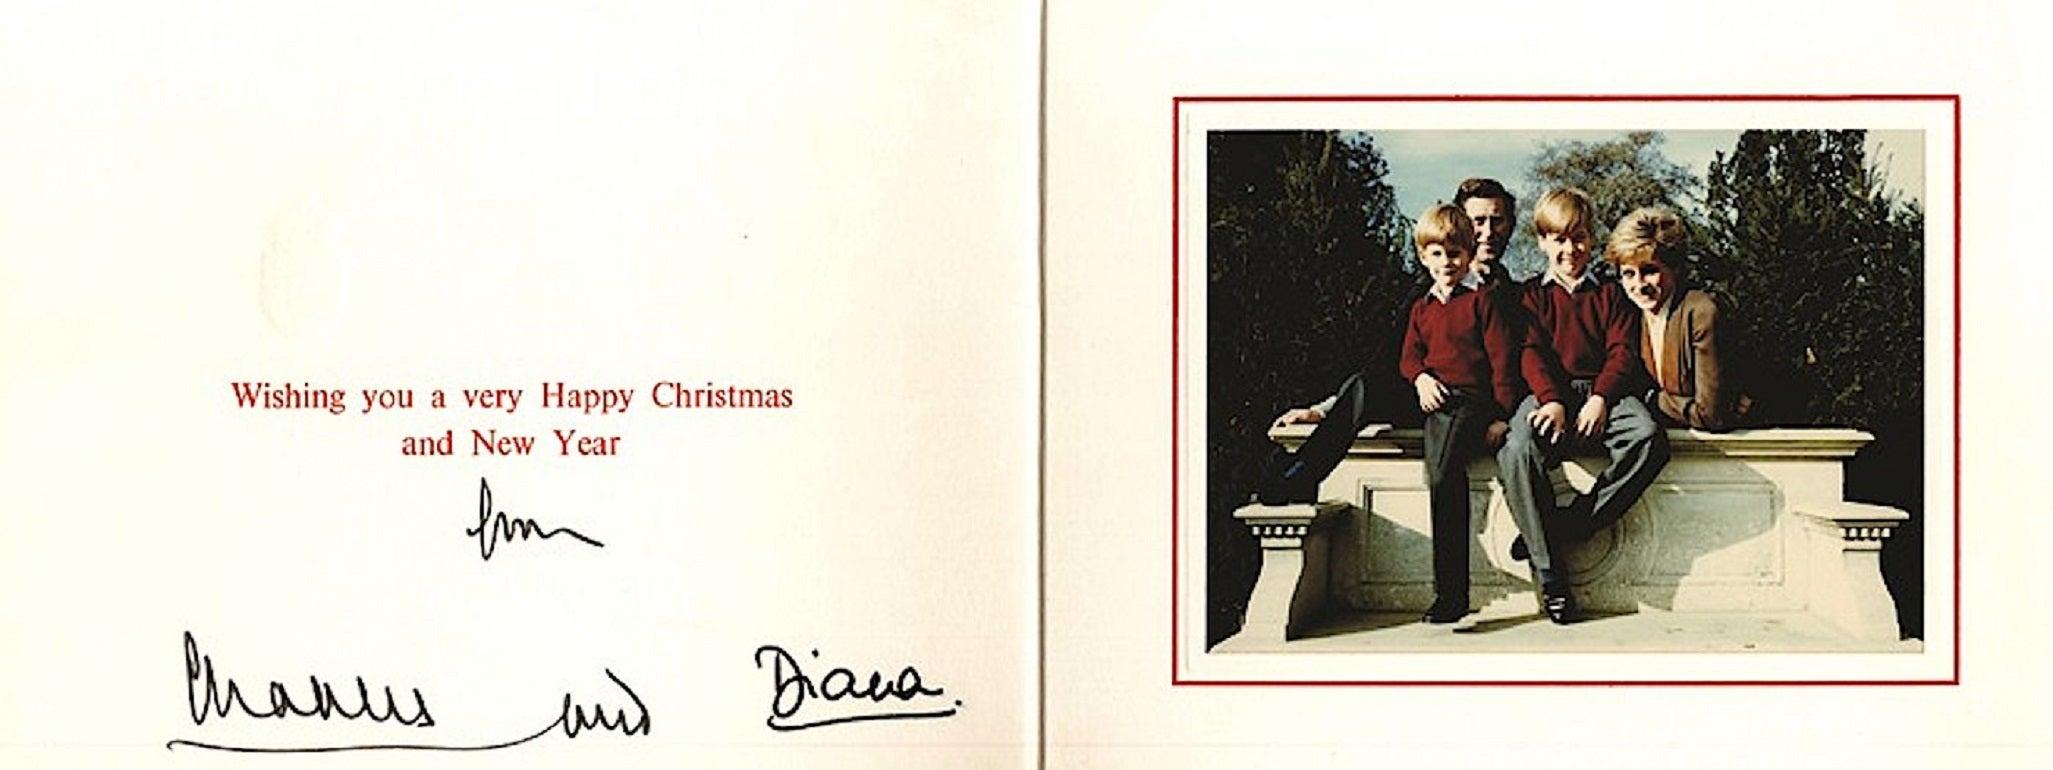 An official British Royal Christmas card signed and inscribed by Prince Charles and Princess Diana in 1990.

The marriage of the Prince & Princess of Wales, Prince Charles (1948-) and Princess Diana (1961-1997) remains one of the most talked about